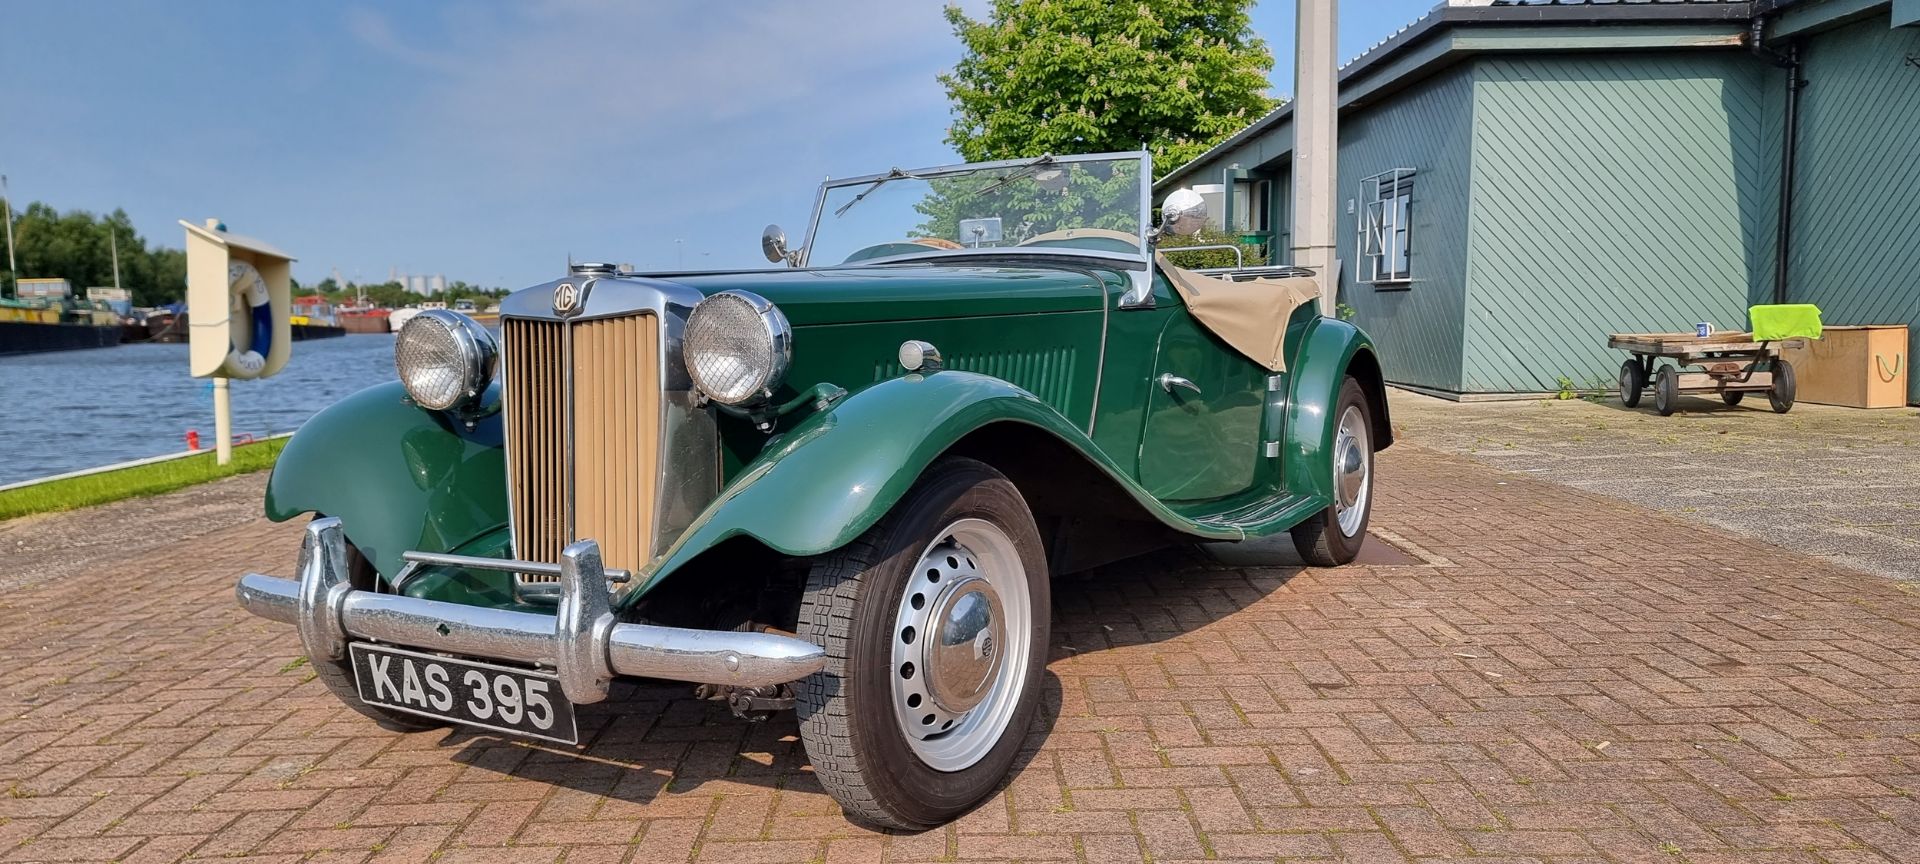 1951 MG TD/C, Mk 2, 1250cc. Registration number KAS 395 (non transferrable). Chassis number TD/ - Image 2 of 20